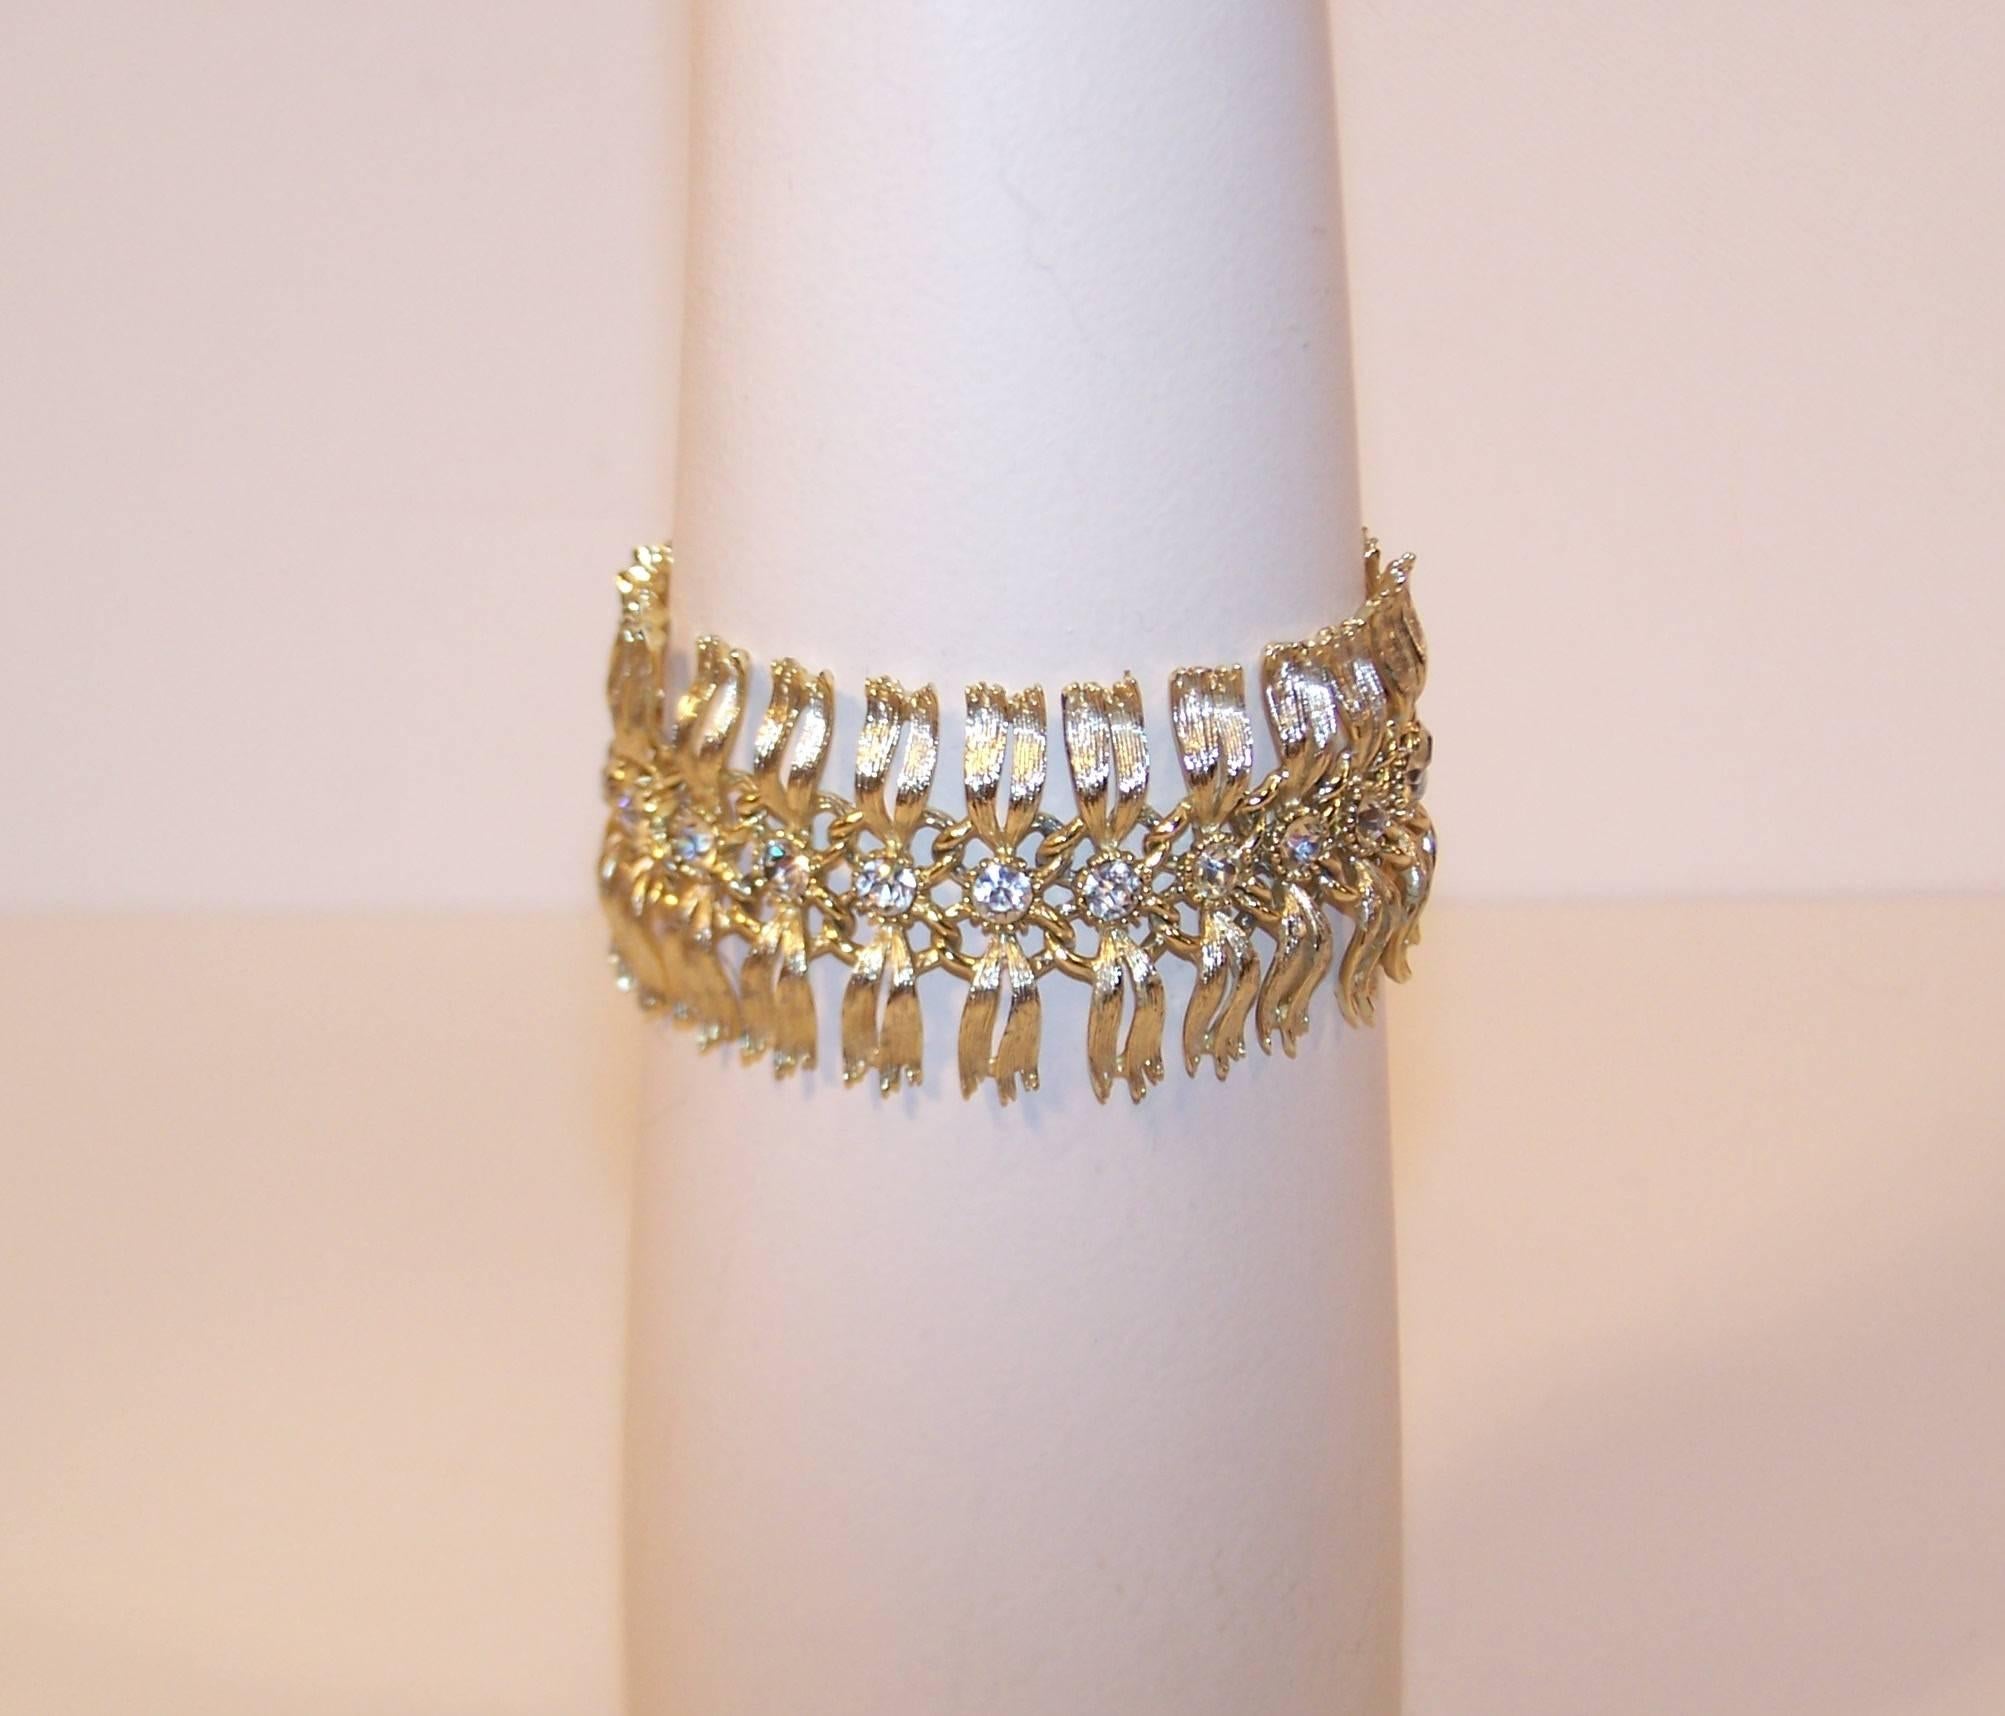 This lovely Lisner bracelet has a serpentine quality to the gold tone articulated links that gives it the ultra glamorous feel of 'dripping with diamonds'.  Each link is a detailed palm frond style leaf accented with a crystal rhinestone which